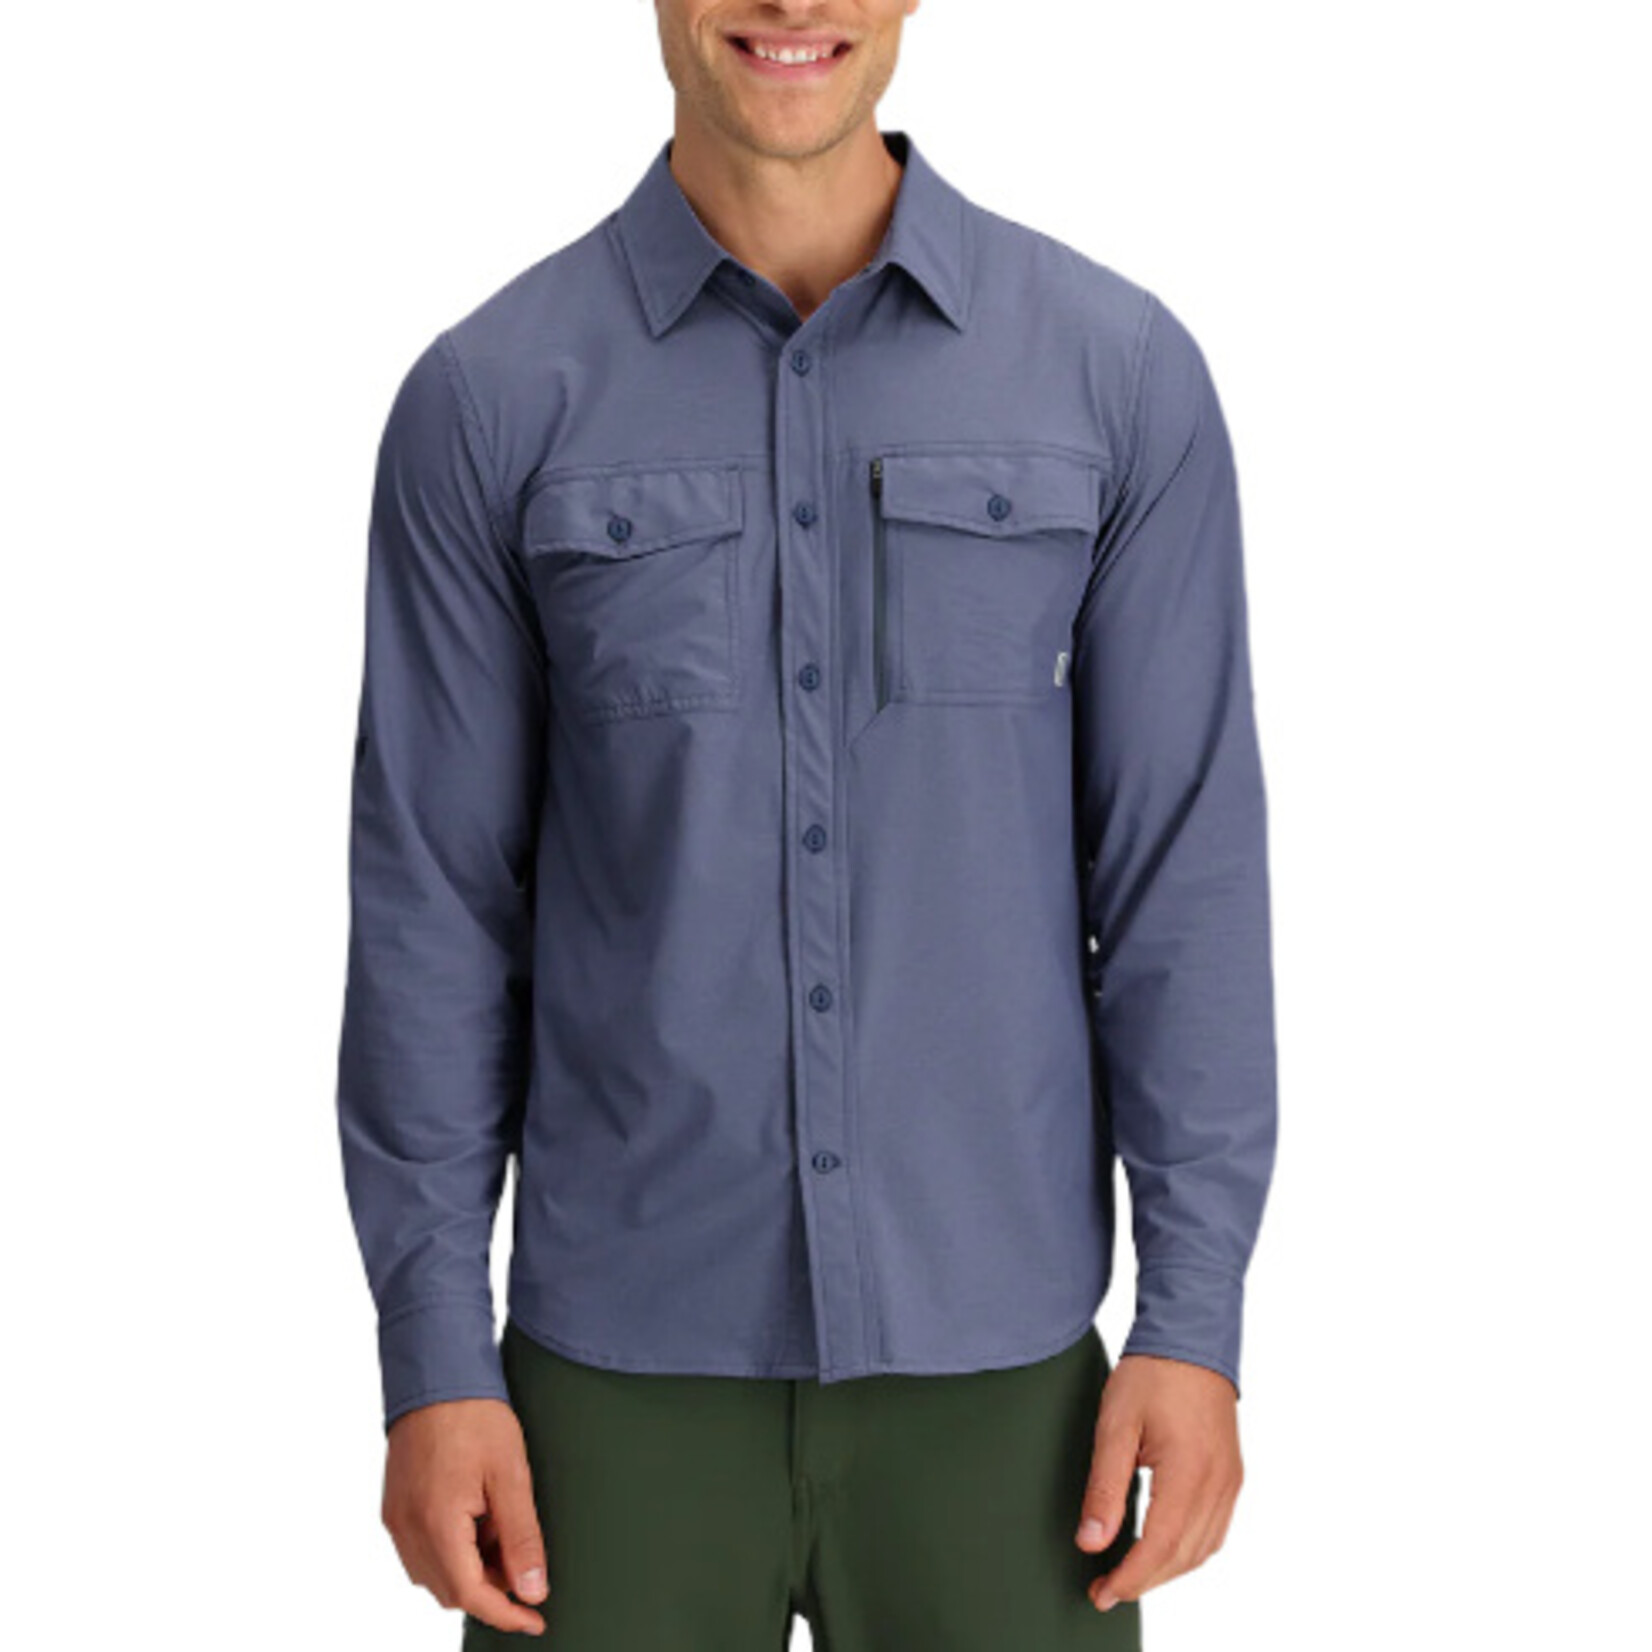 Outdoor Research Way Station Long Sleeve Shirt